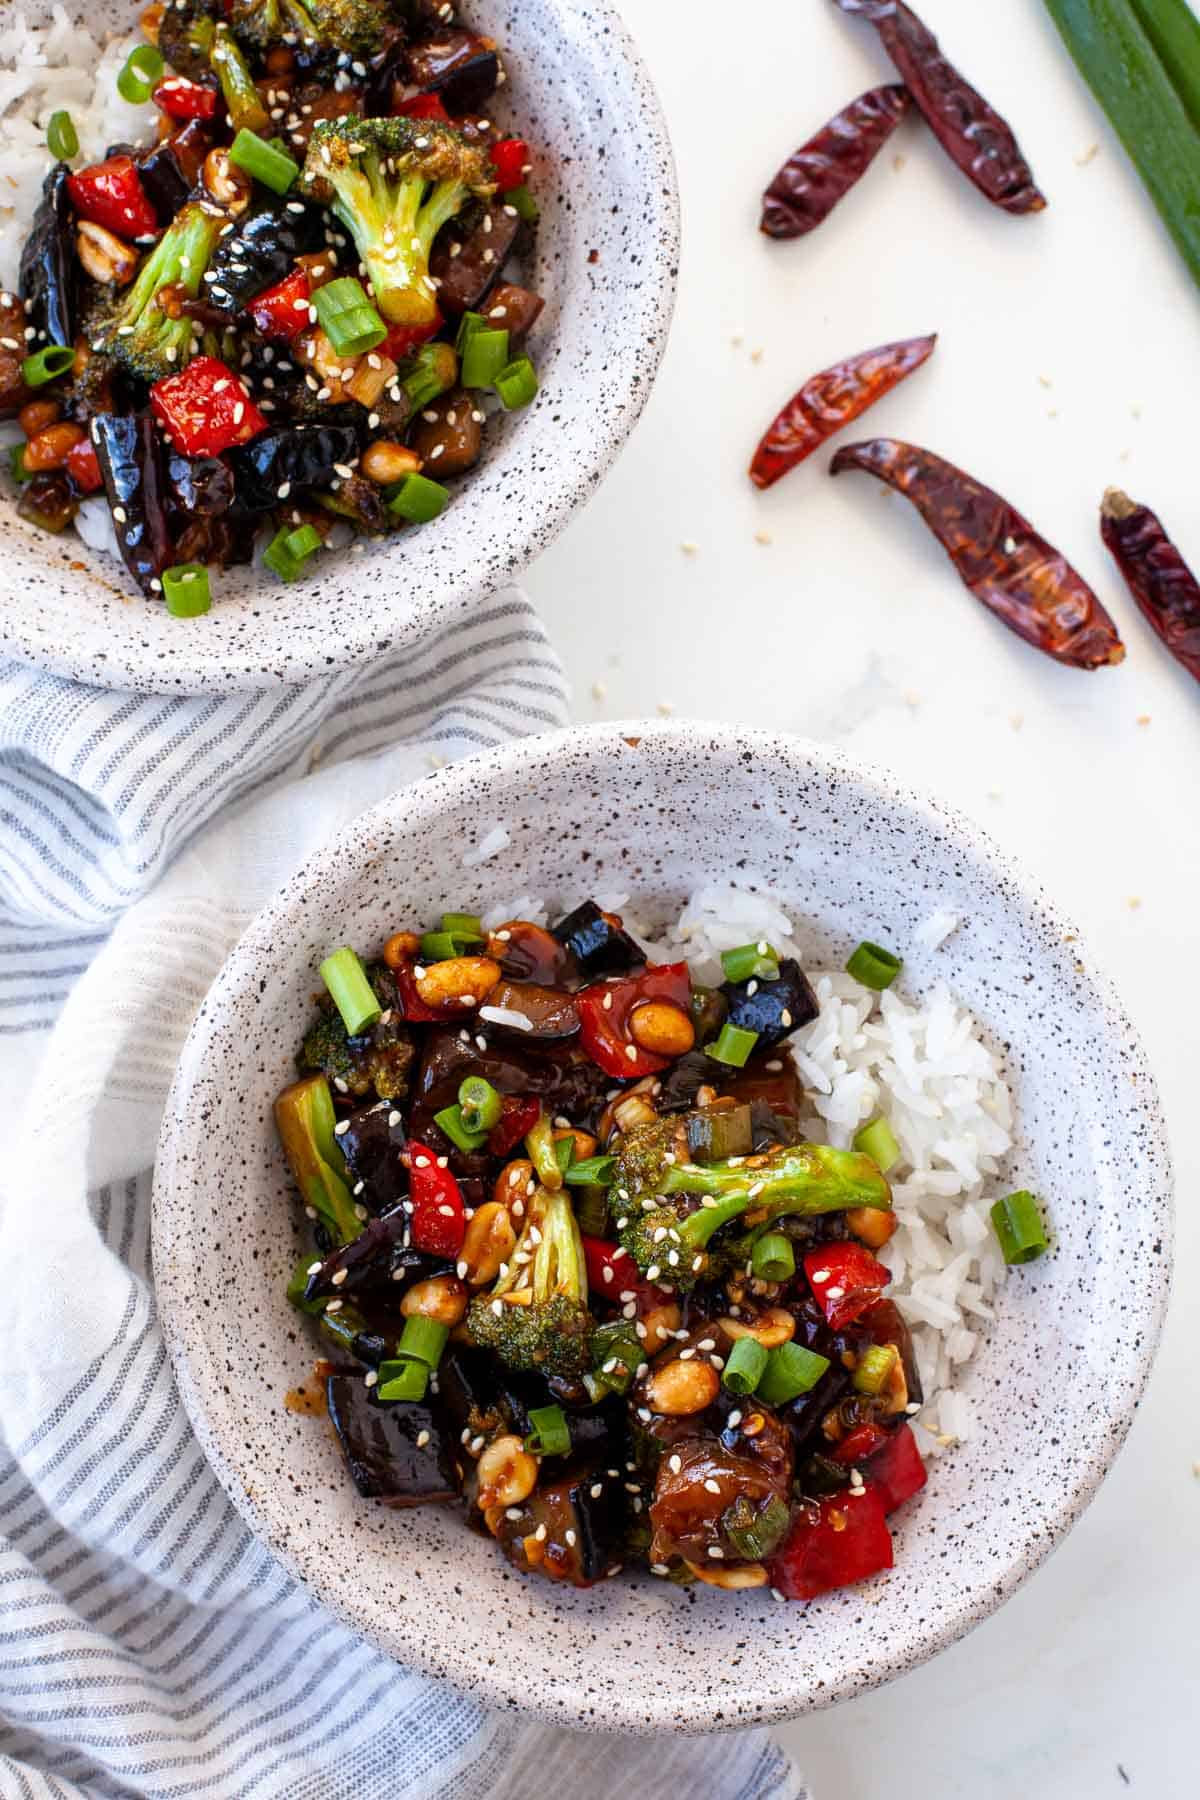 kung pao vegetables with rice in grey speckled bowls, dried chilis and striped dish towel